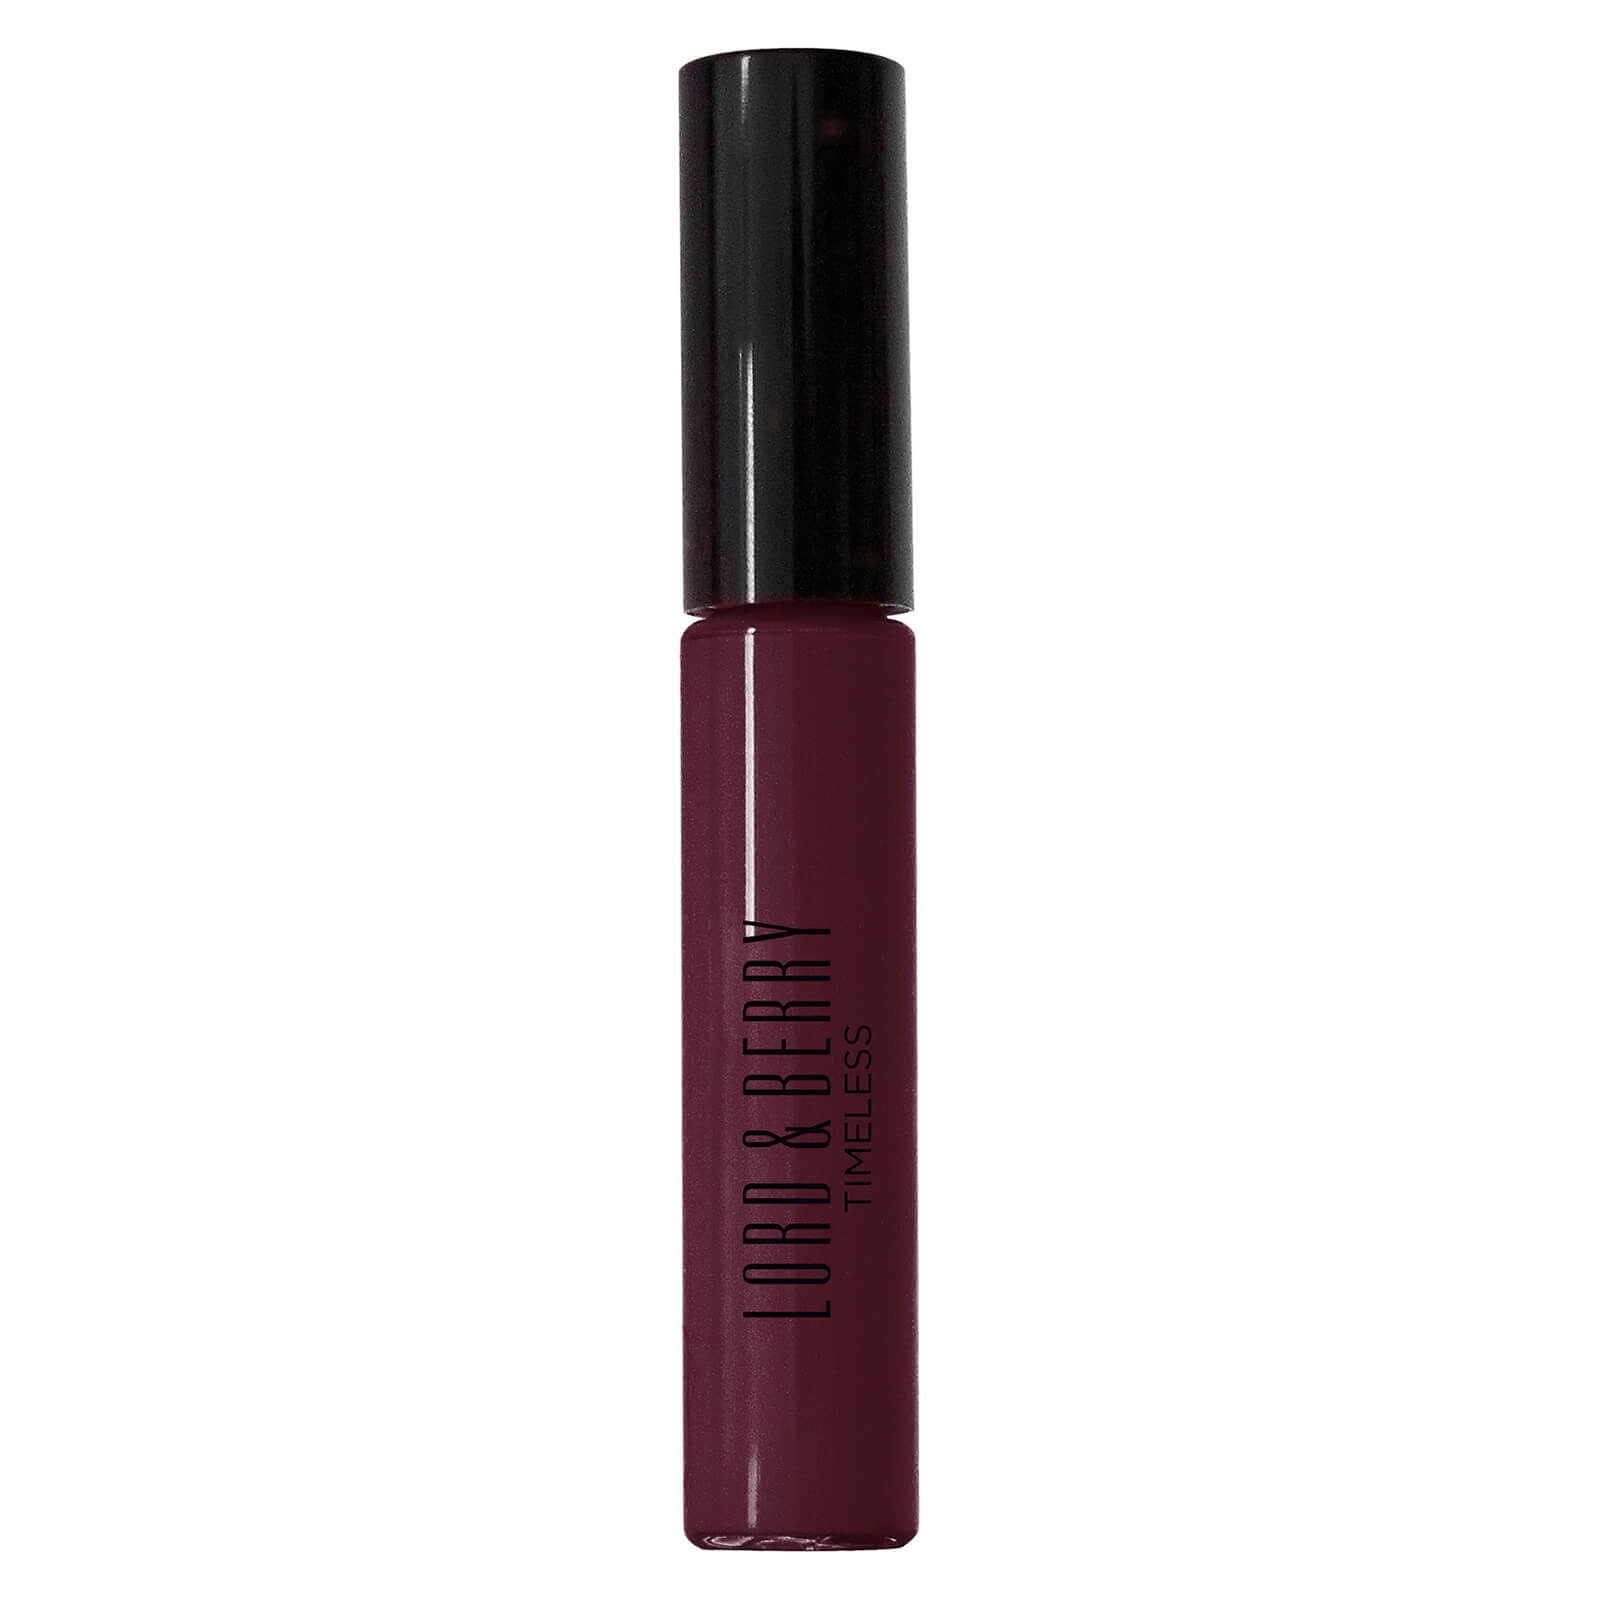 Lord & Berry Timeless Kissproof Lipstick Помада для губ - Knockout